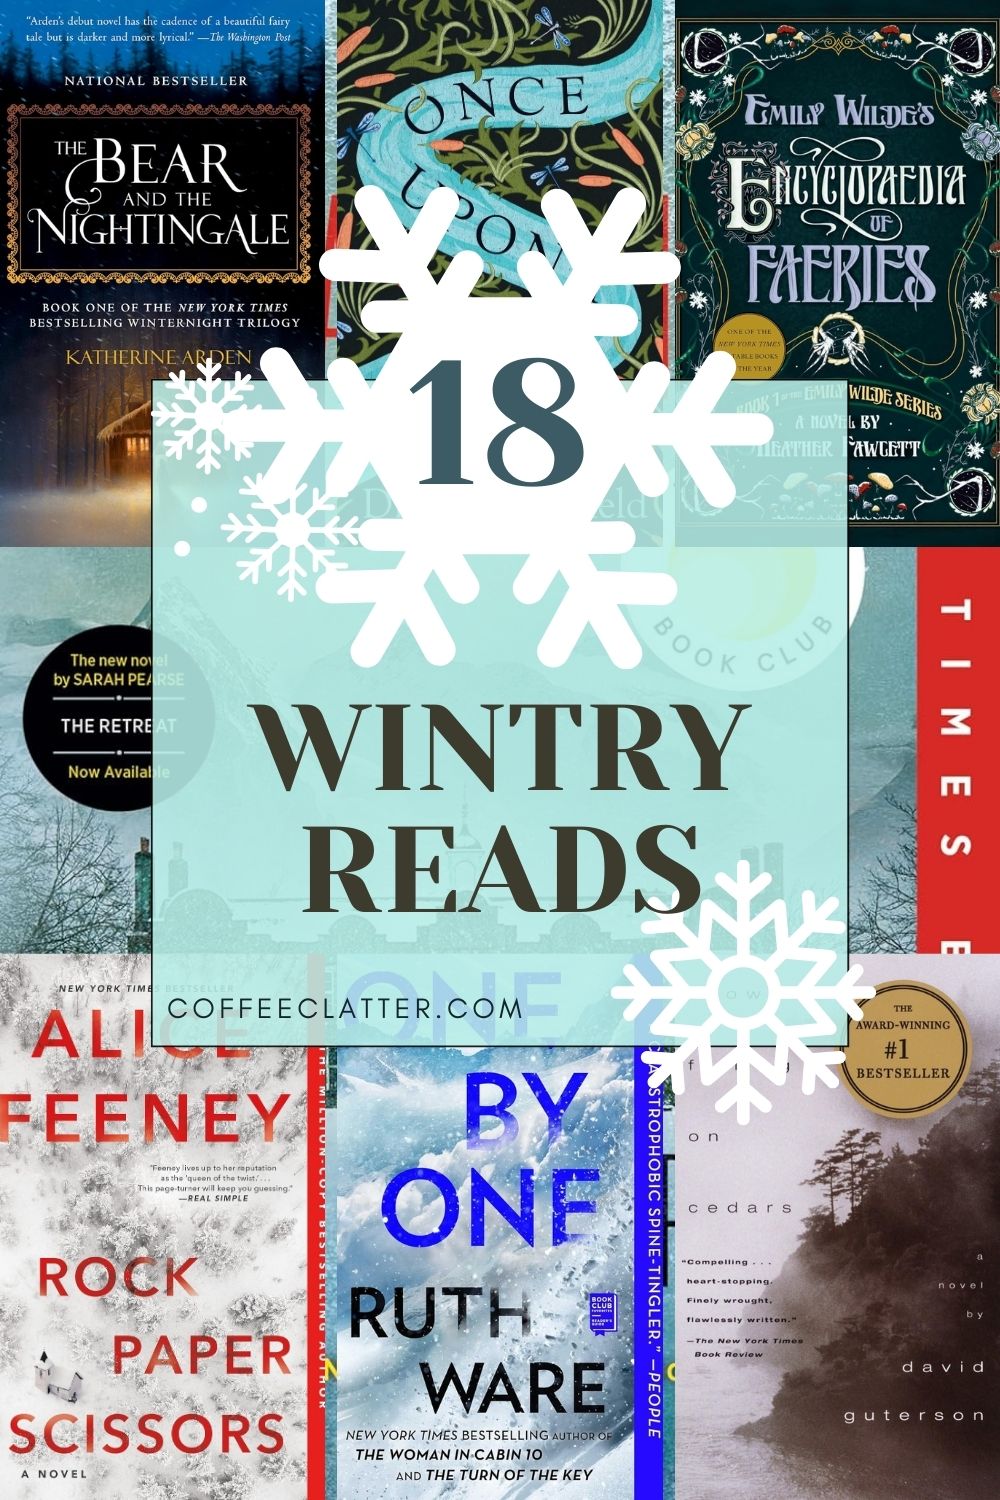 wintry-reads-to-be-read-book-lists